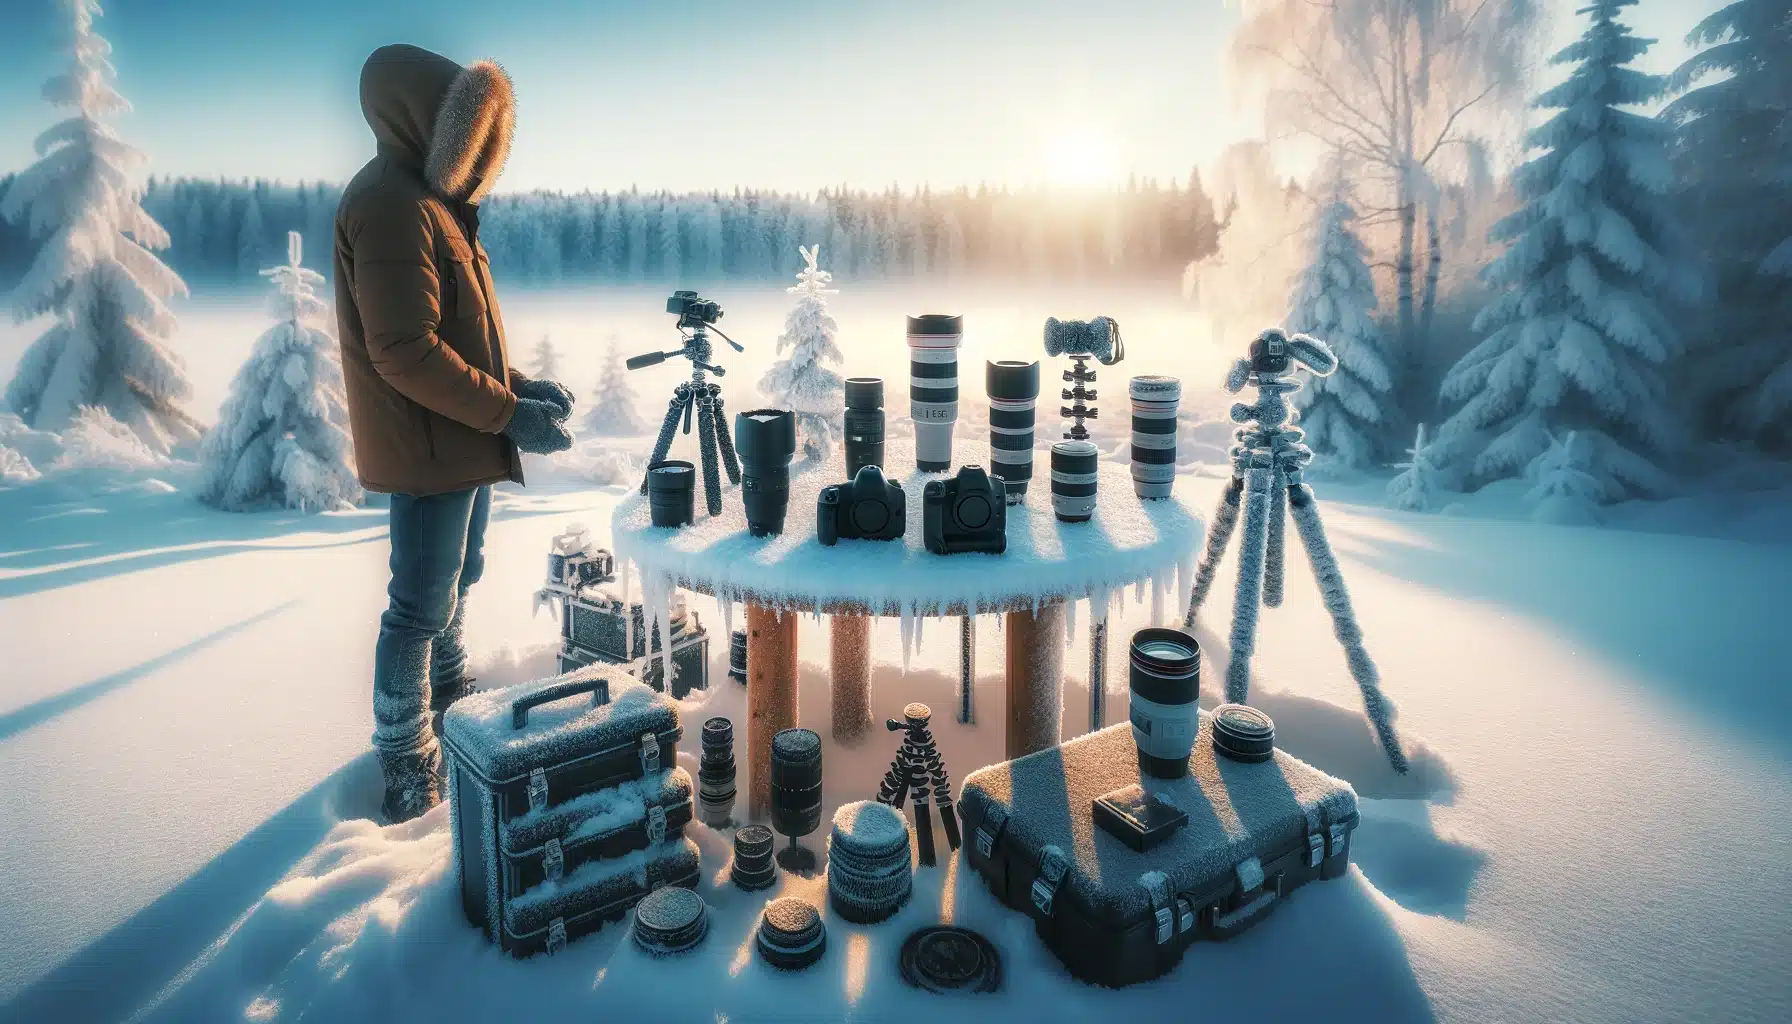 A person in warm clothing stands next to a snow-covered table with various photography gear, including cameras, lenses, and tripods, set against a snowy landscape with trees and a clear sky.